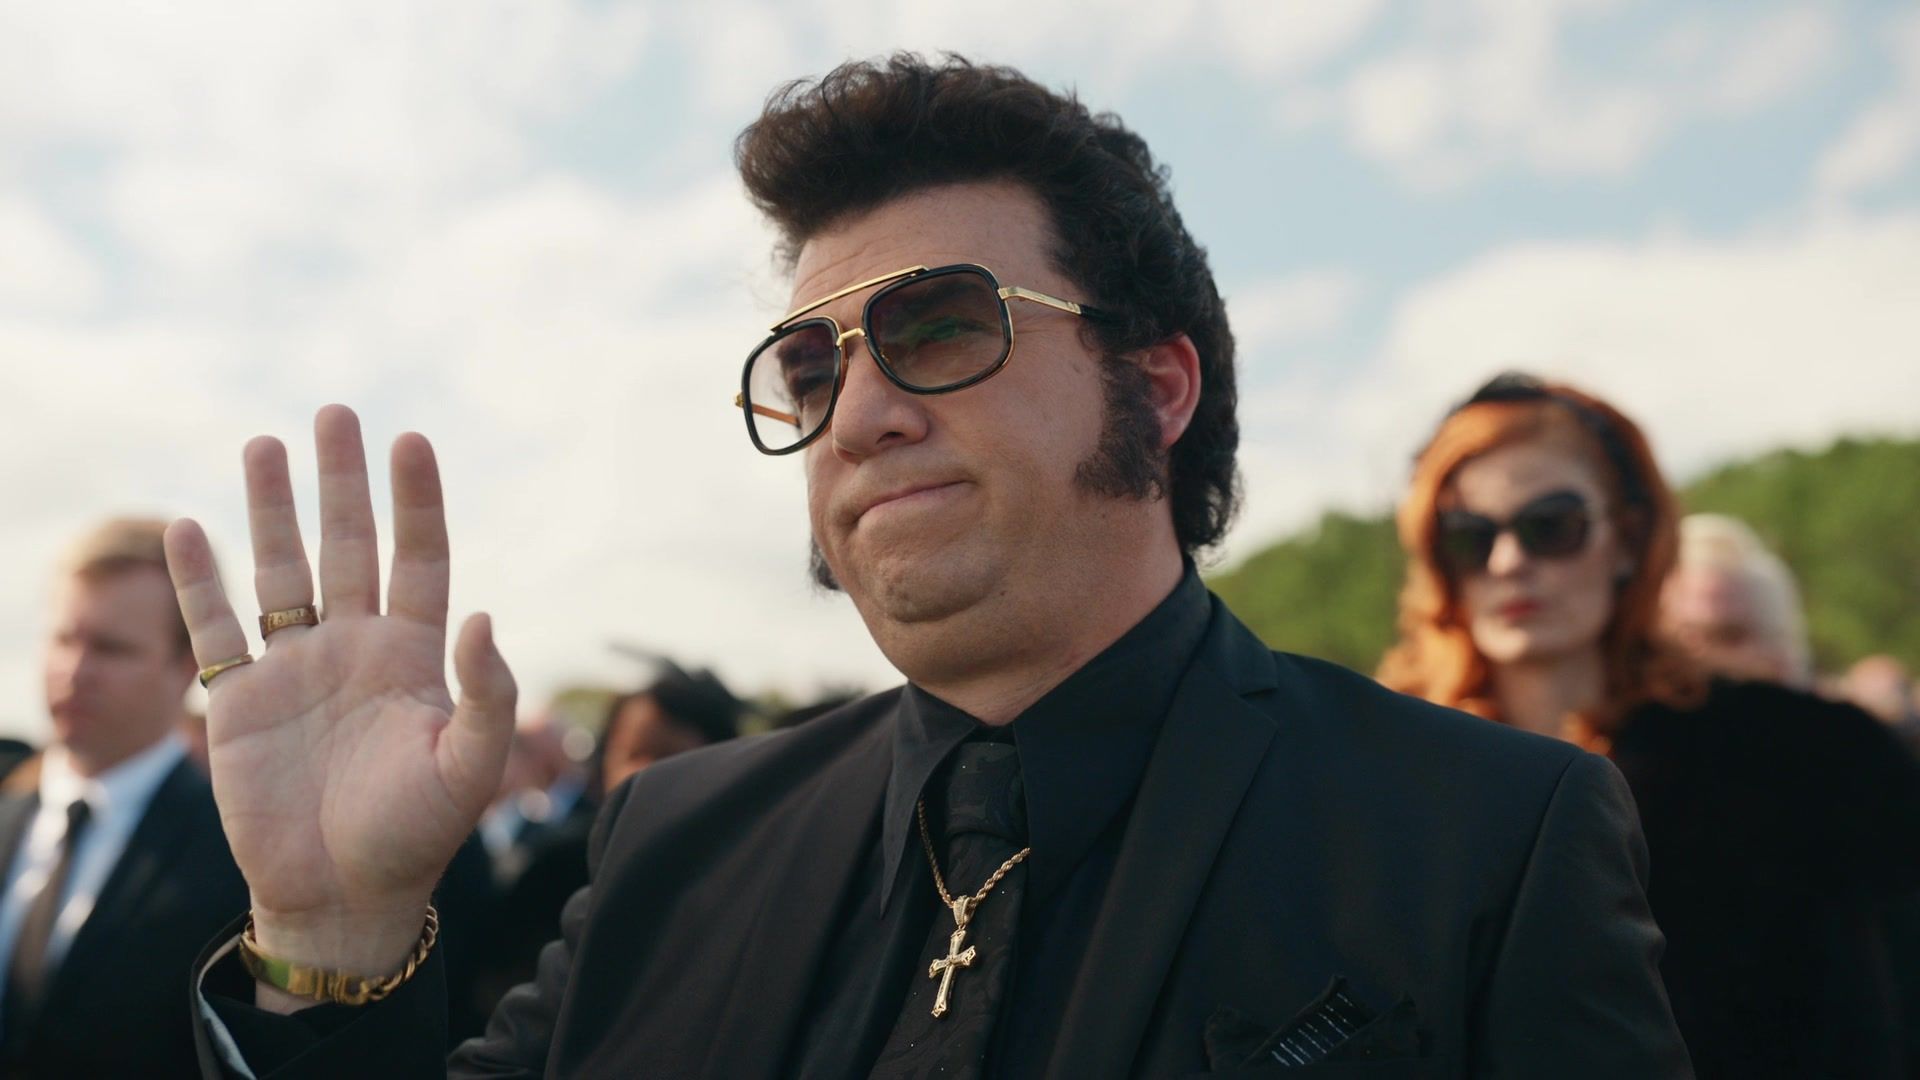 Worn on The Righteous Gemstones TV Show - Square Frame Sunglasses Worn by Danny McBride as Jesse Gemstone